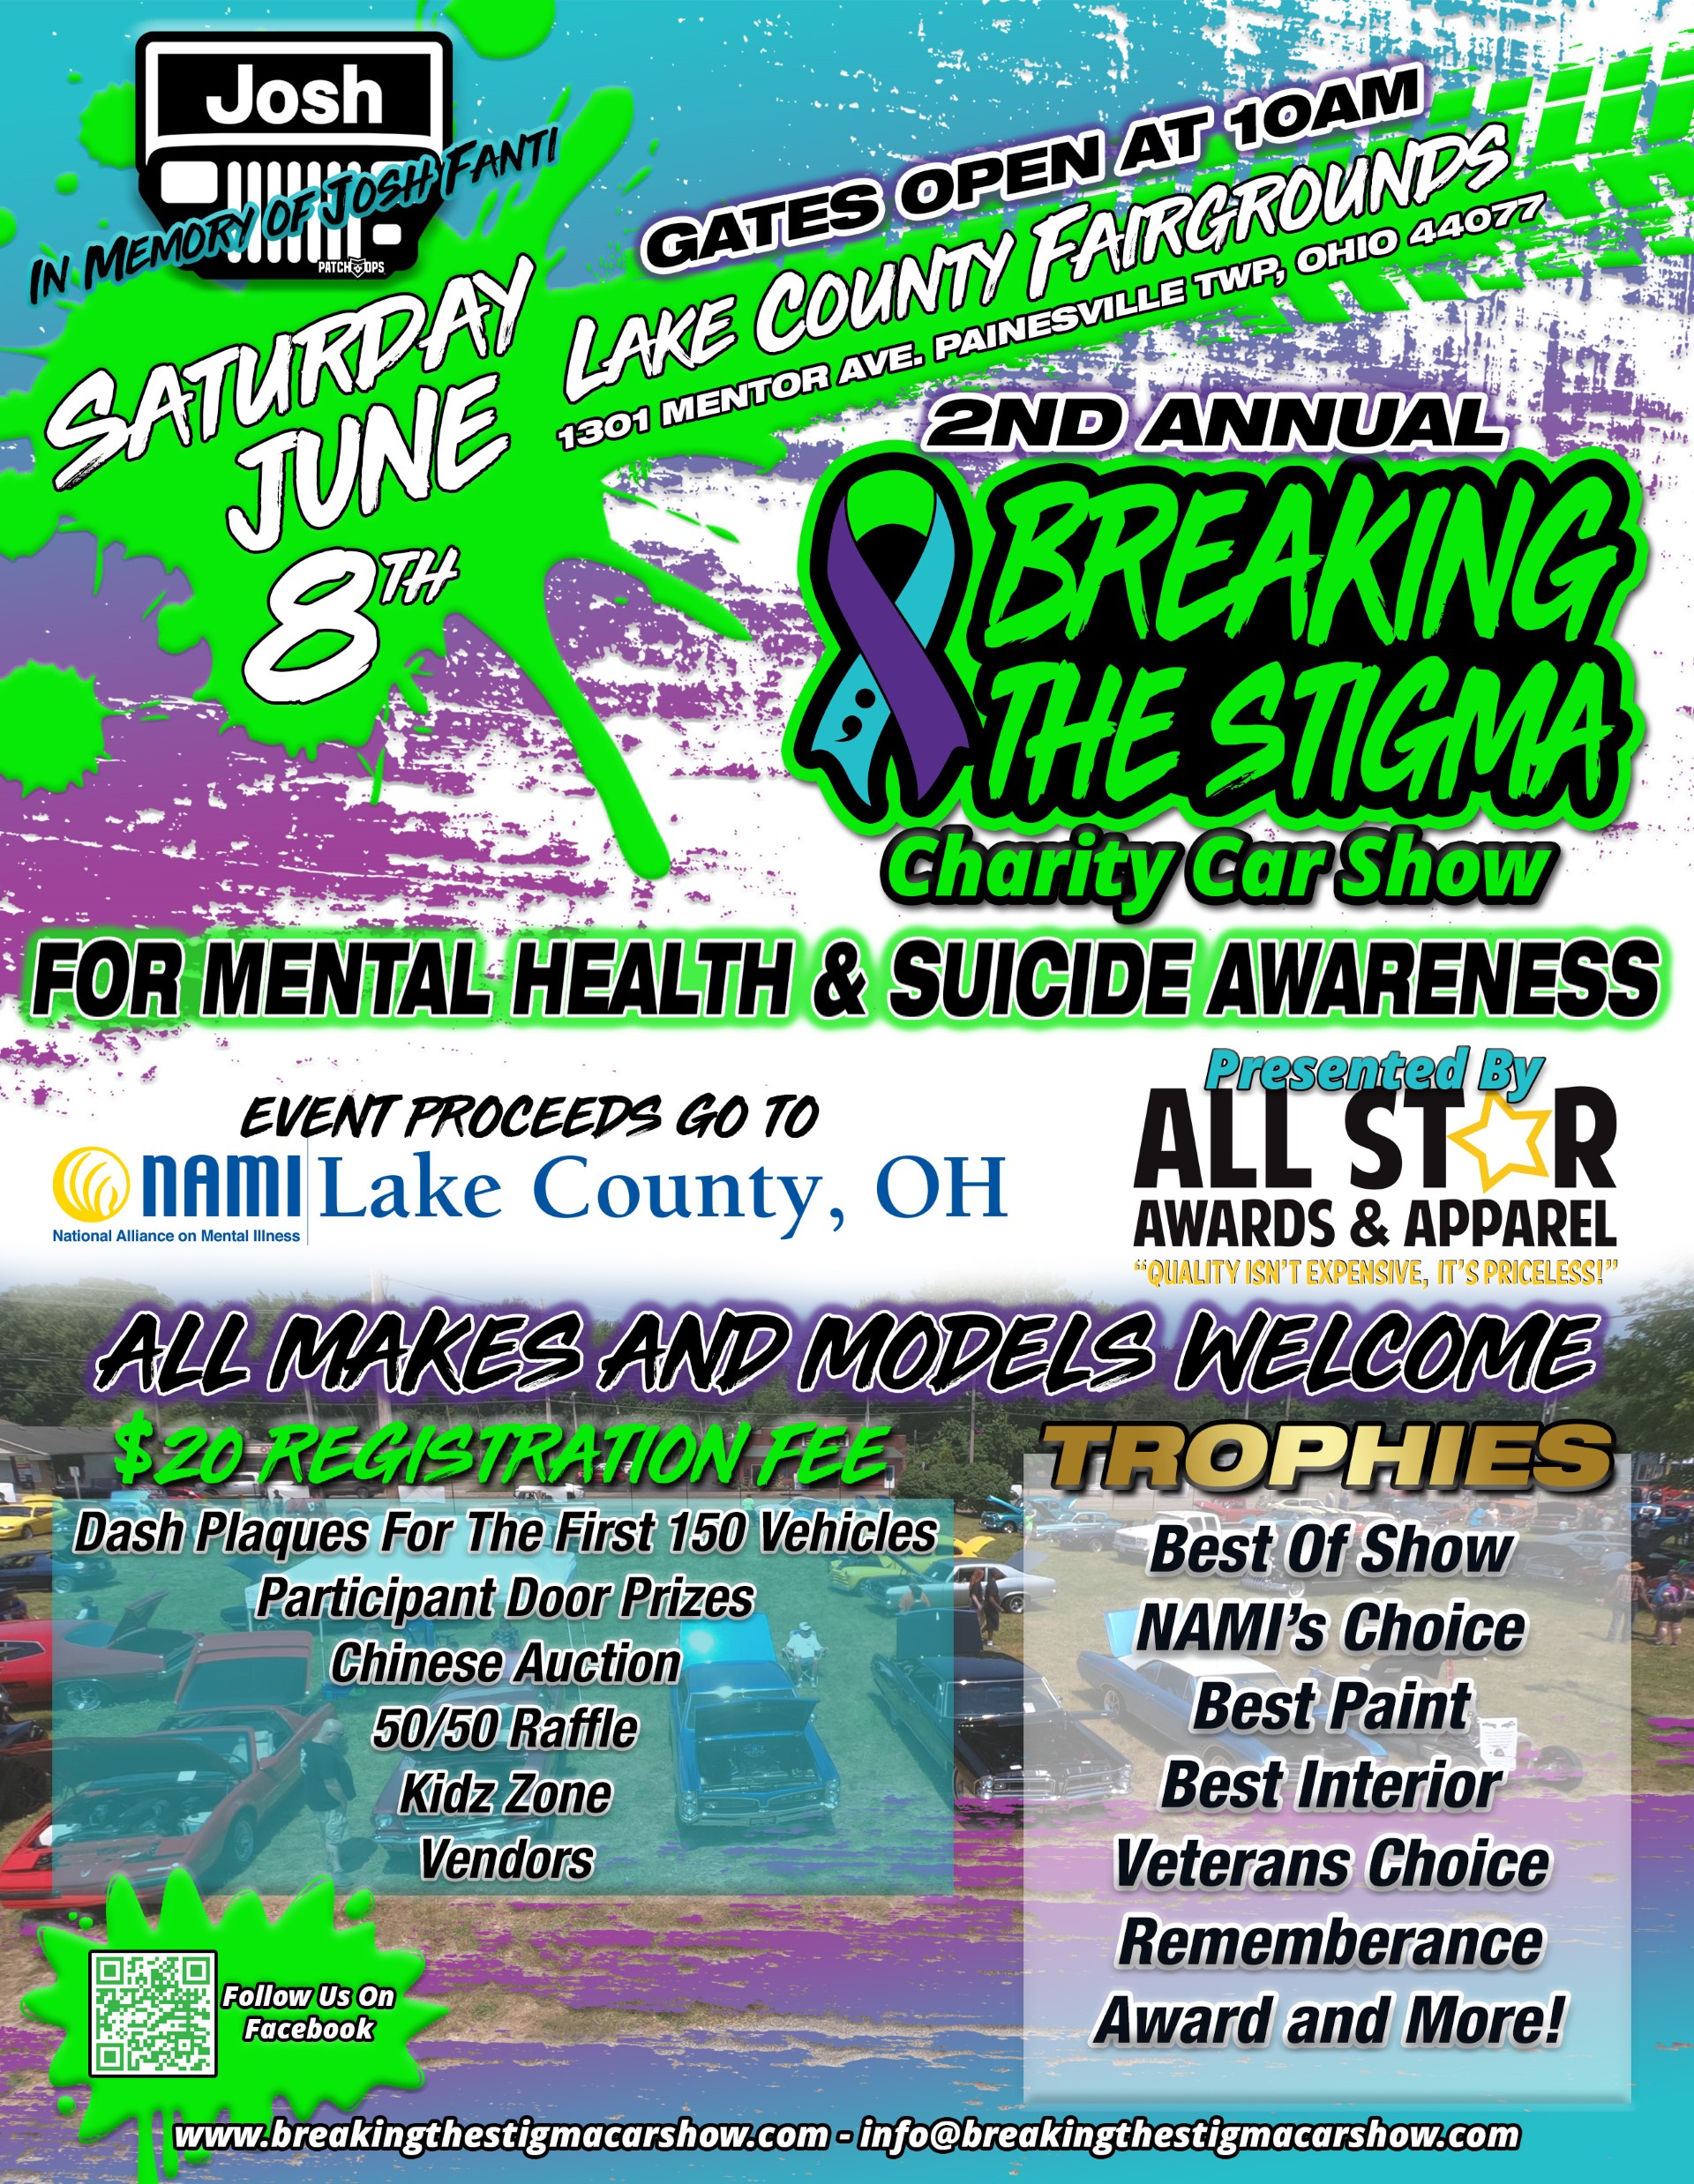 2nd Annual Breaking the Stigma Car Show Flyer